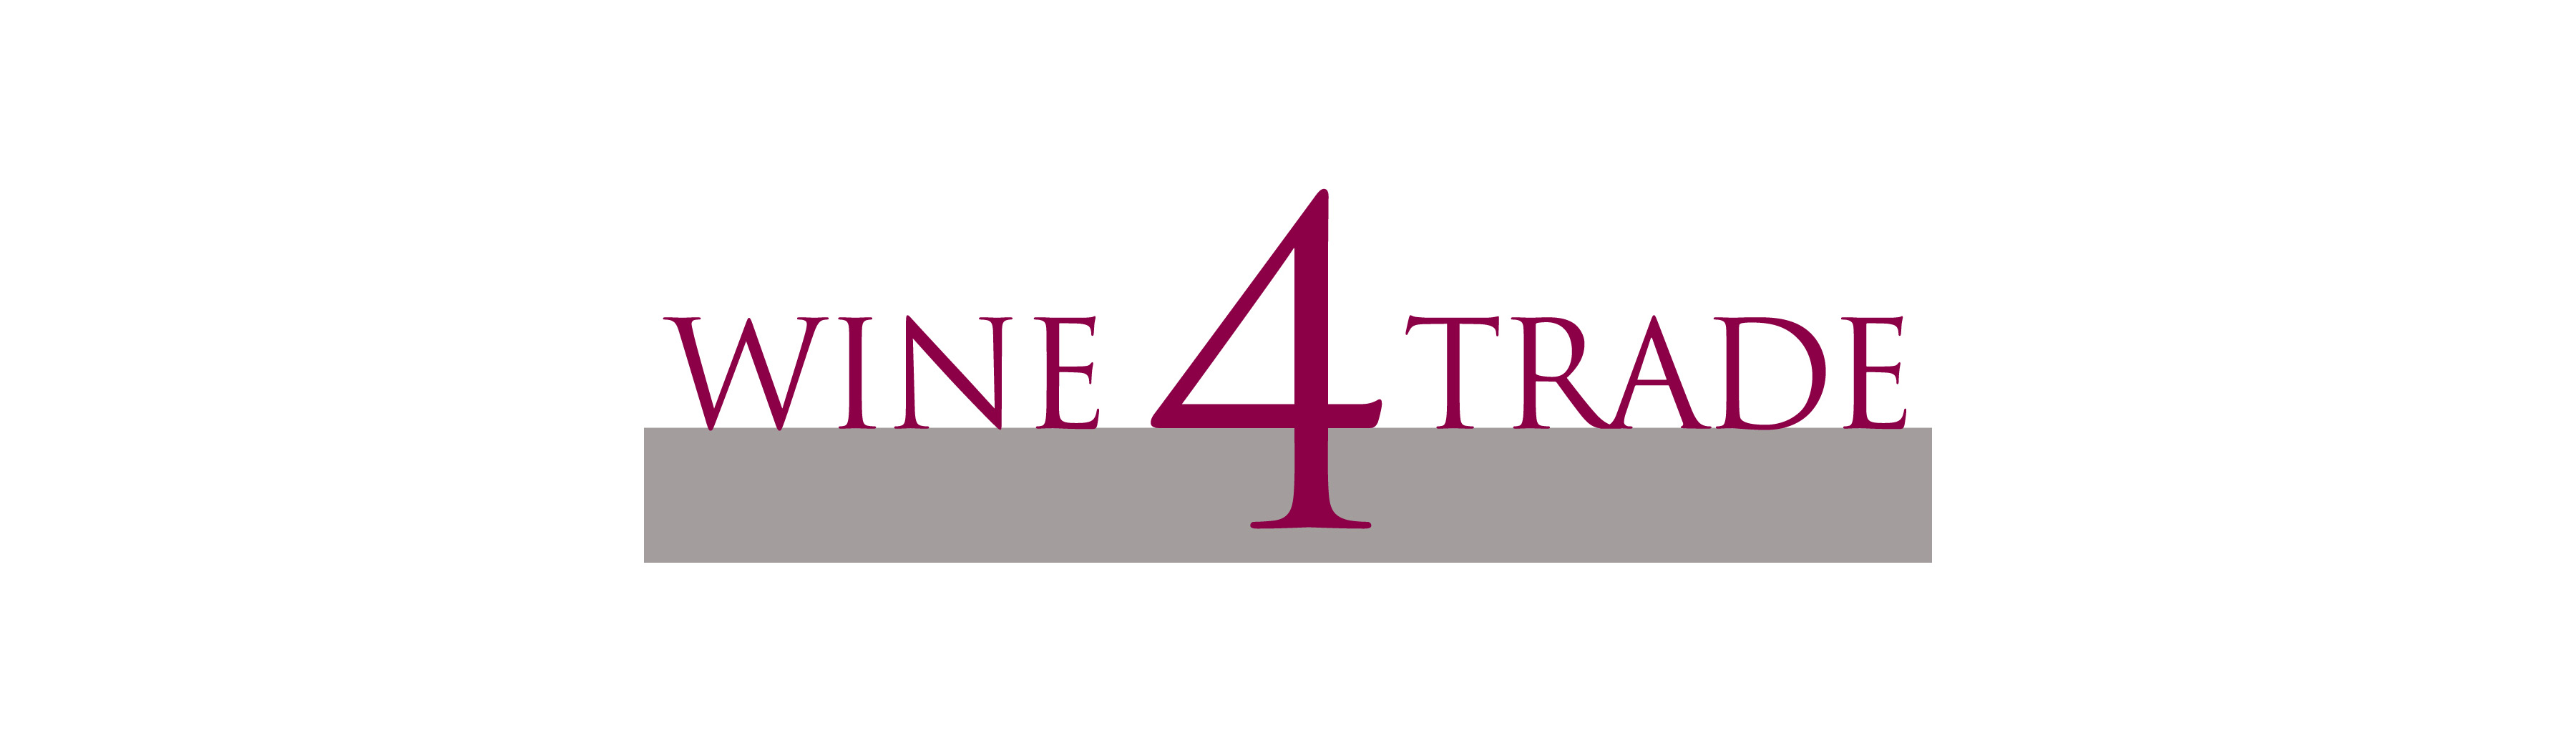 Wine 4 Trade specialises in the organisation of global professional exhibitions specifically for the wine industry.